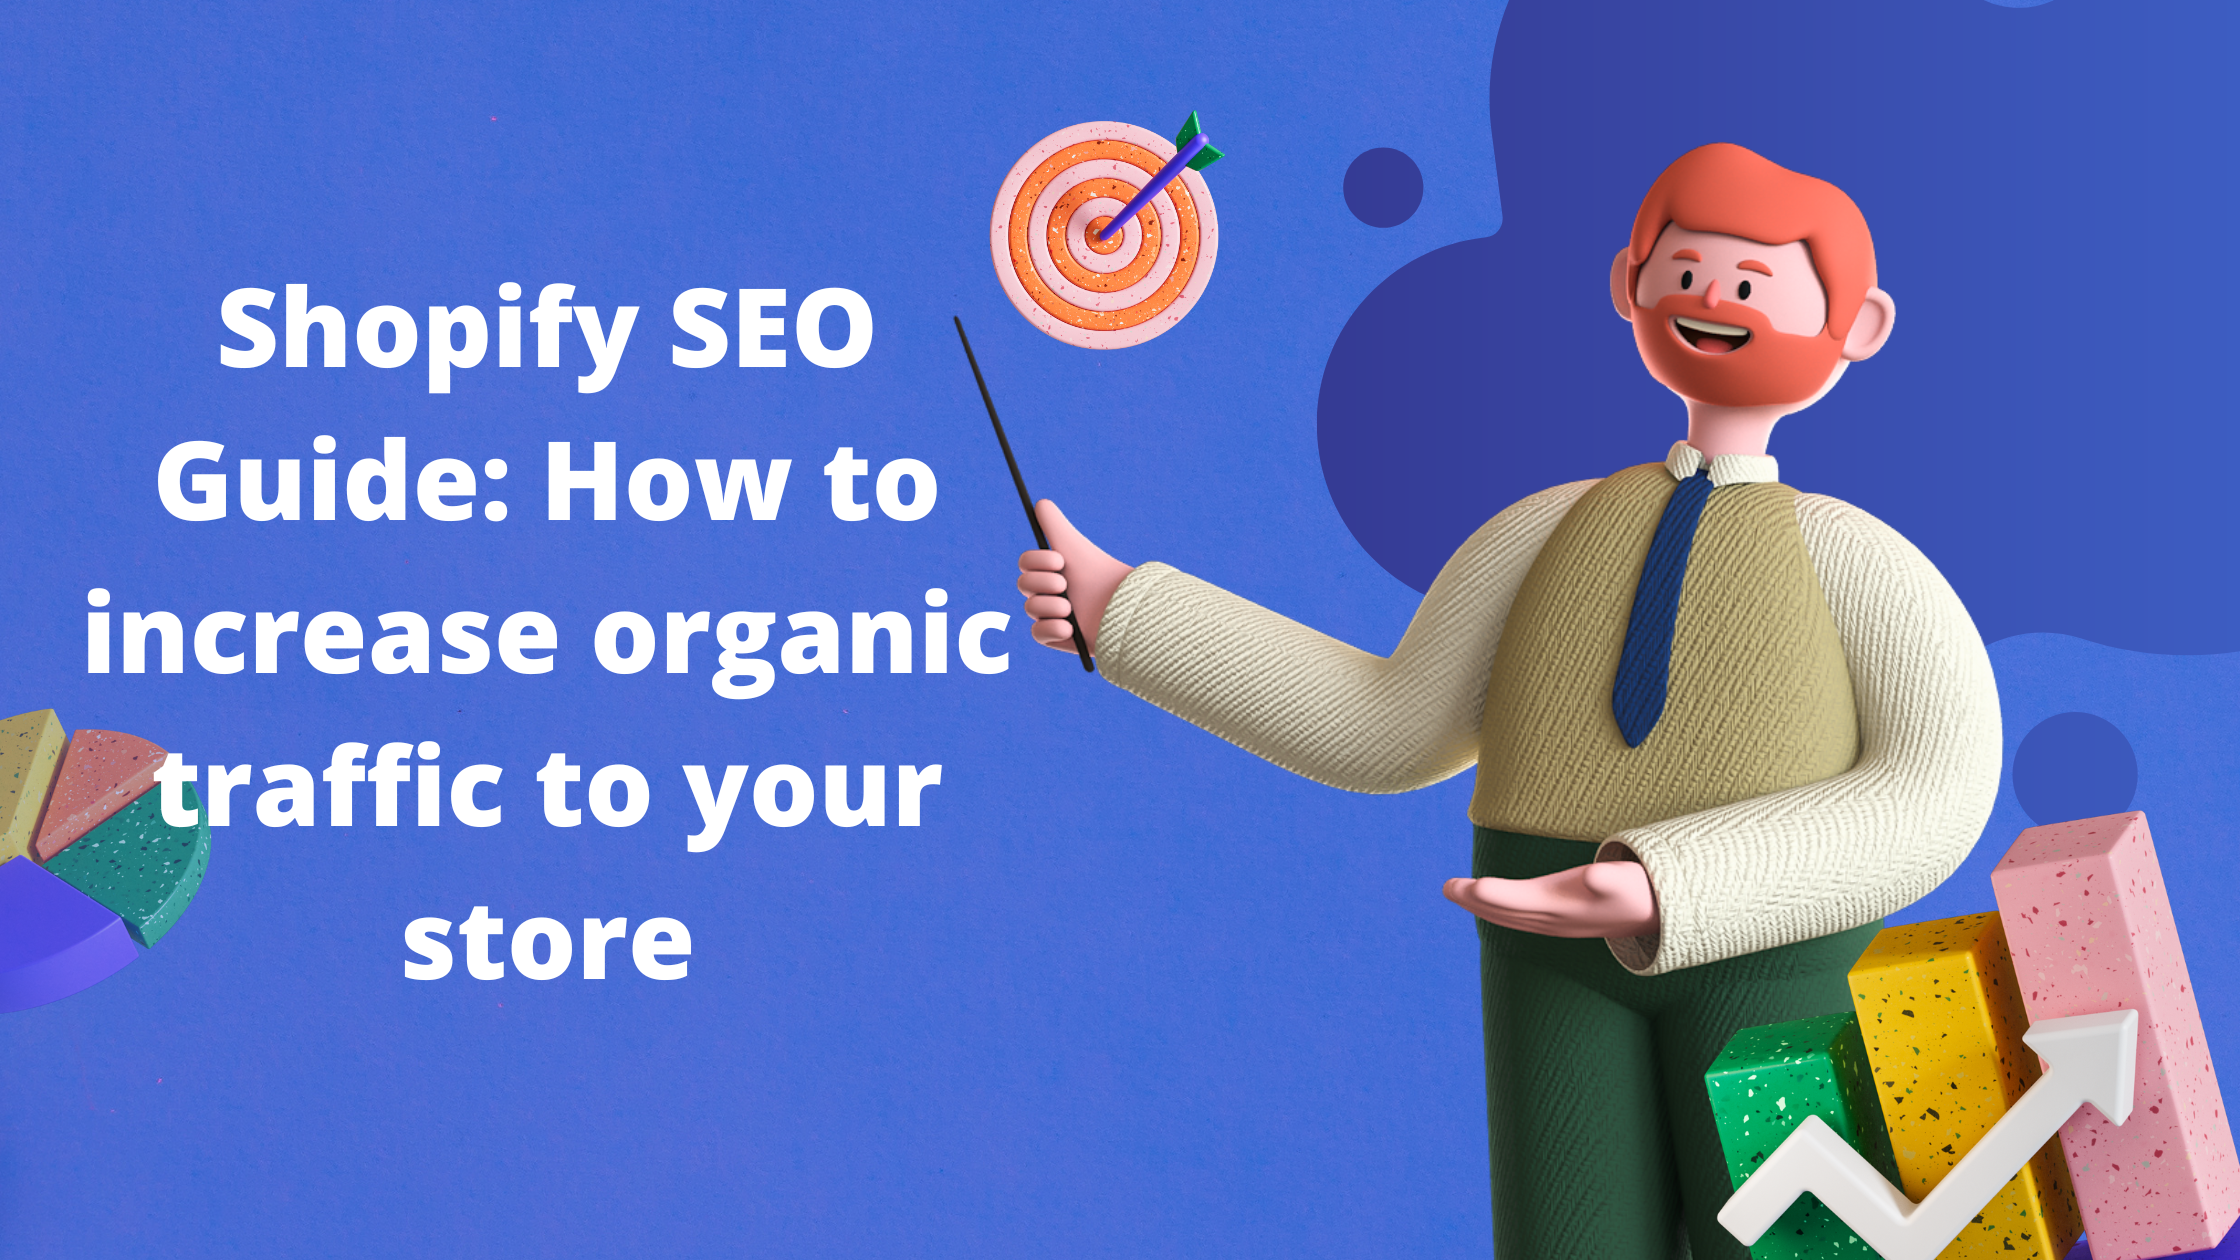 Shopify SEO Guide How to increase organic traffic to your store